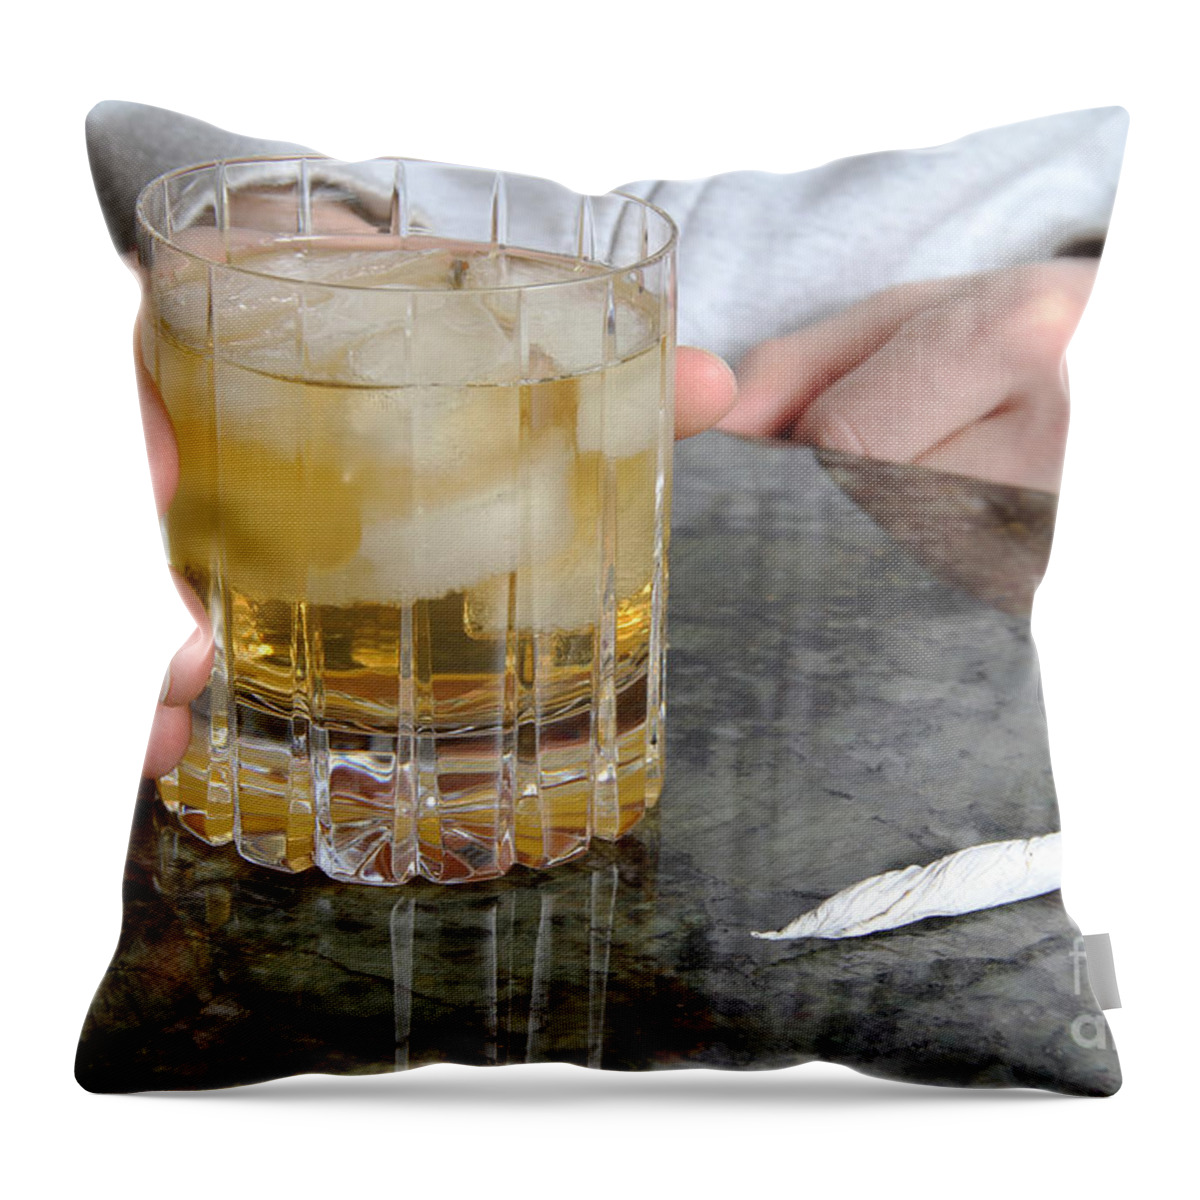 Still Life Throw Pillow featuring the photograph Drug Use by Photo Researchers